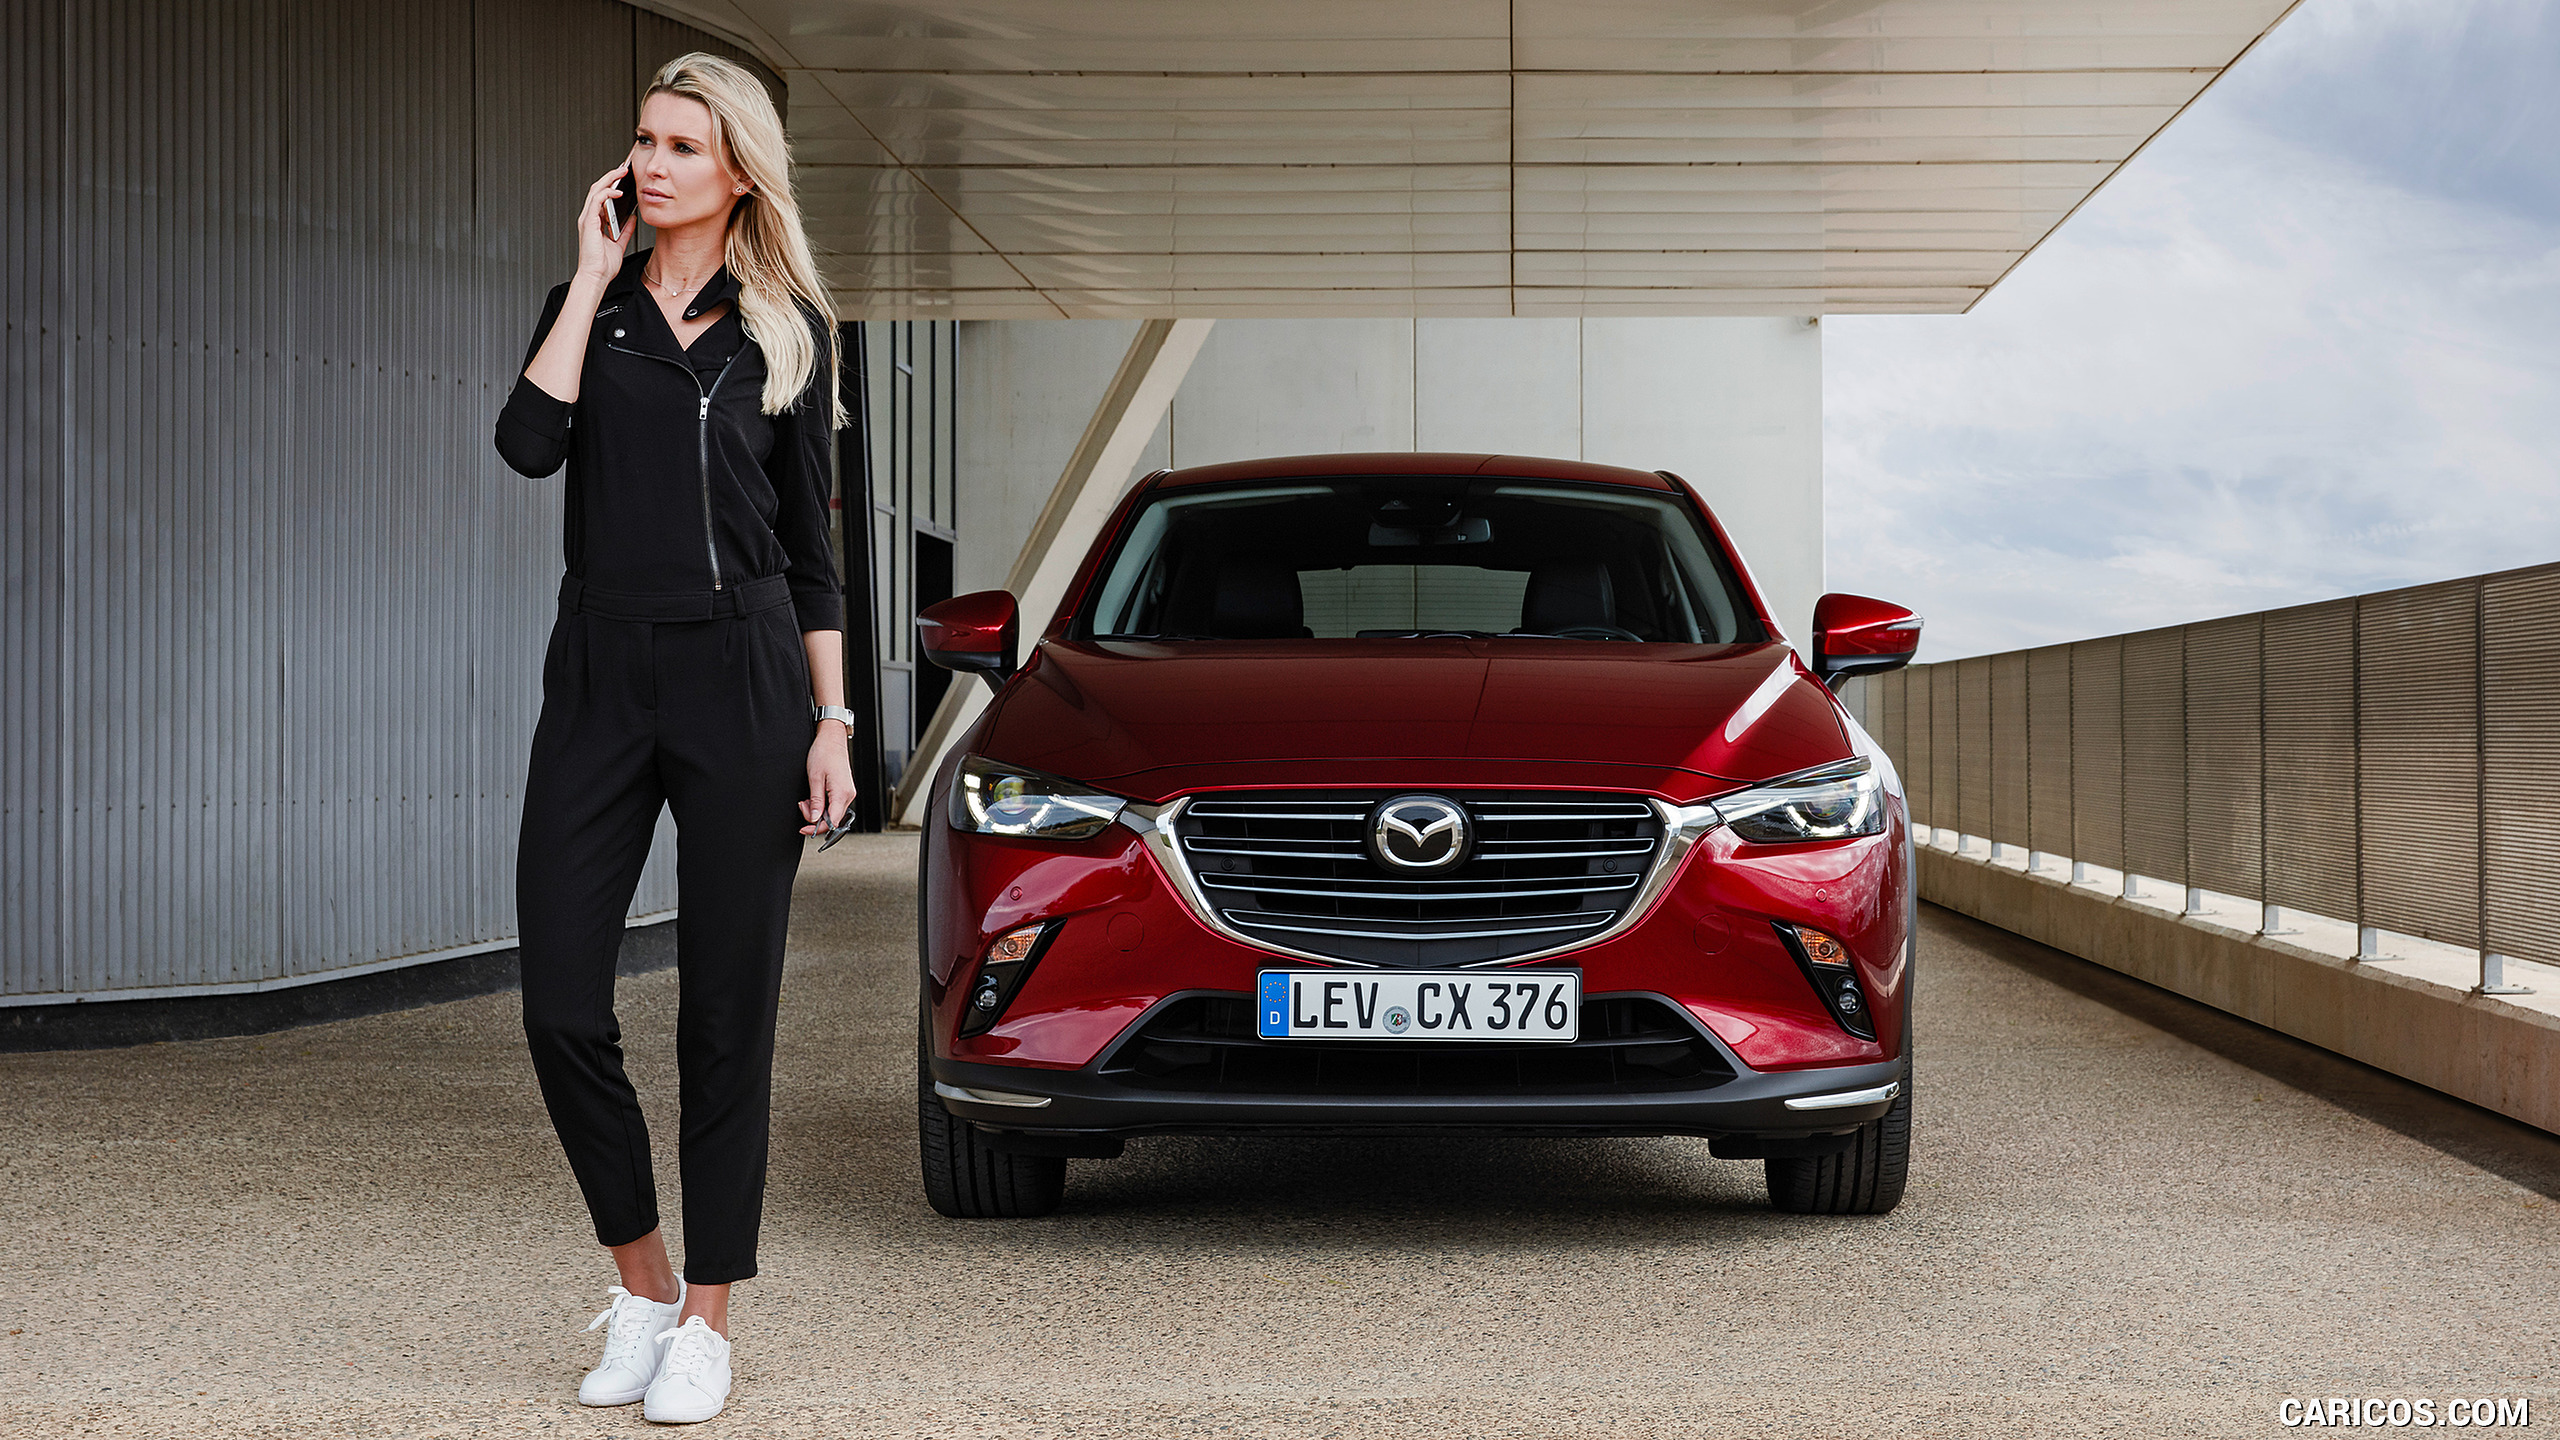 2019 Mazda CX-3 - Front, #42 of 85